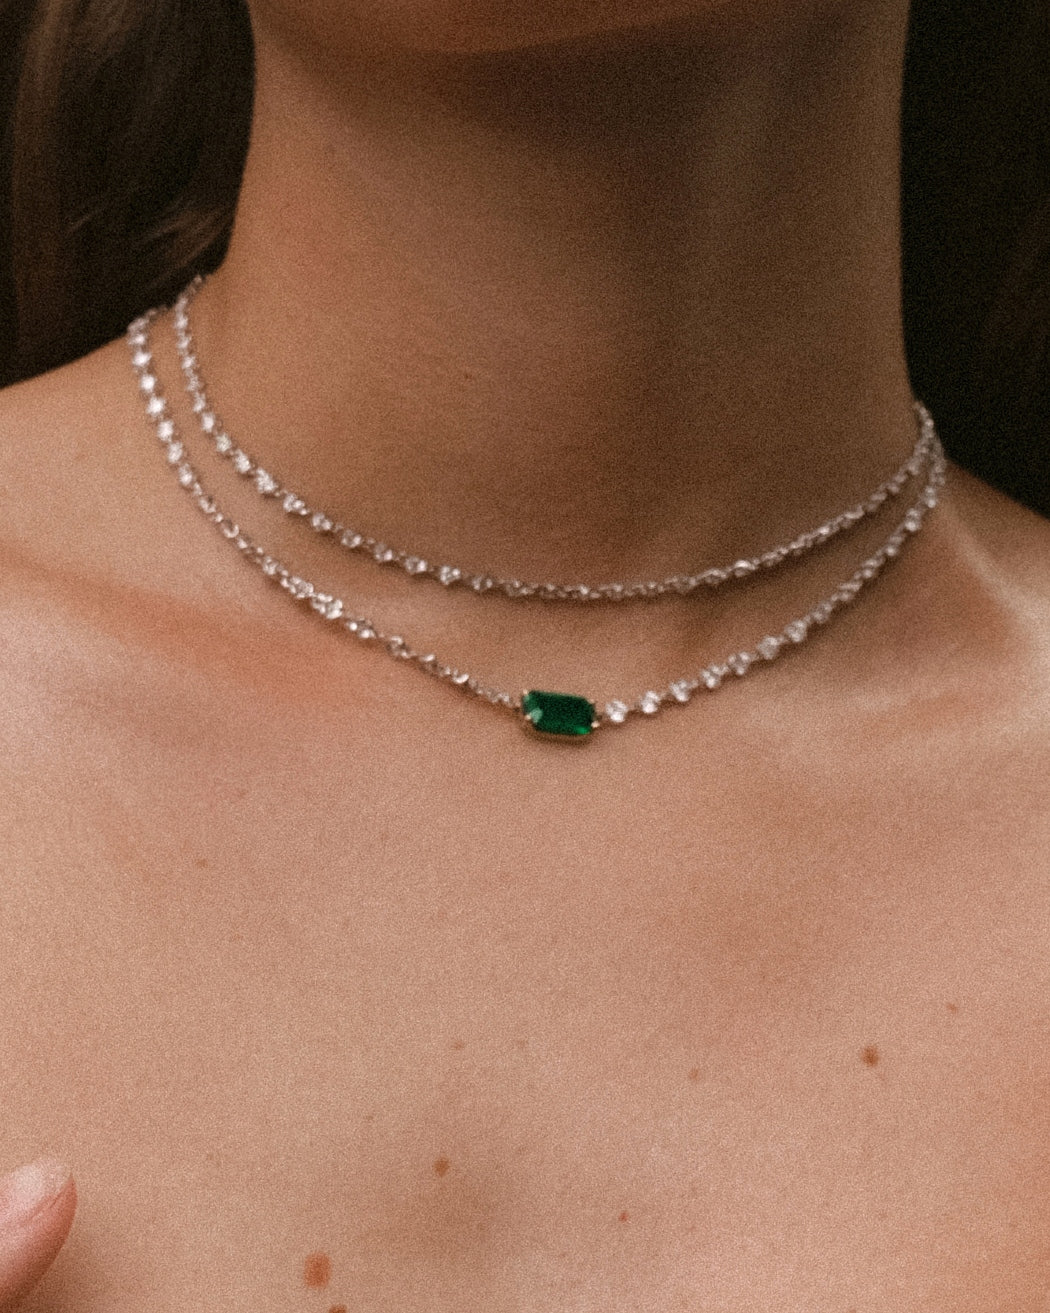 EL19 Necklace with diamonds and emerald